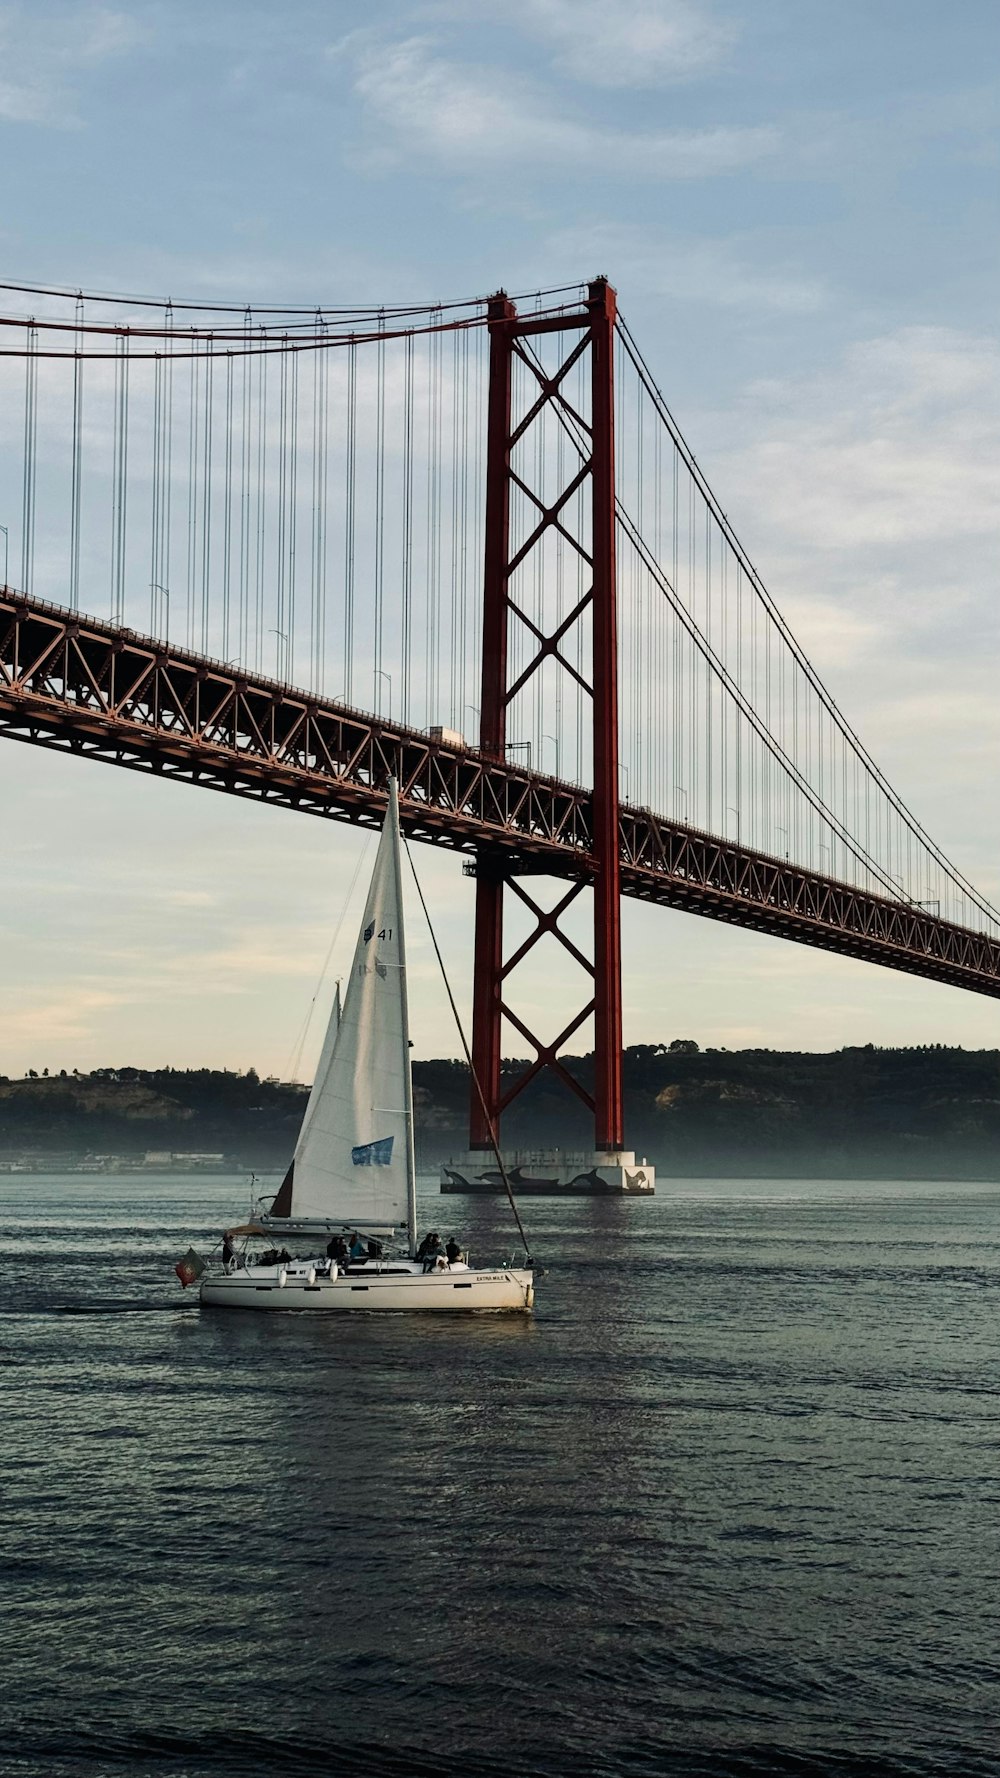 a sailboat in the water under a bridge